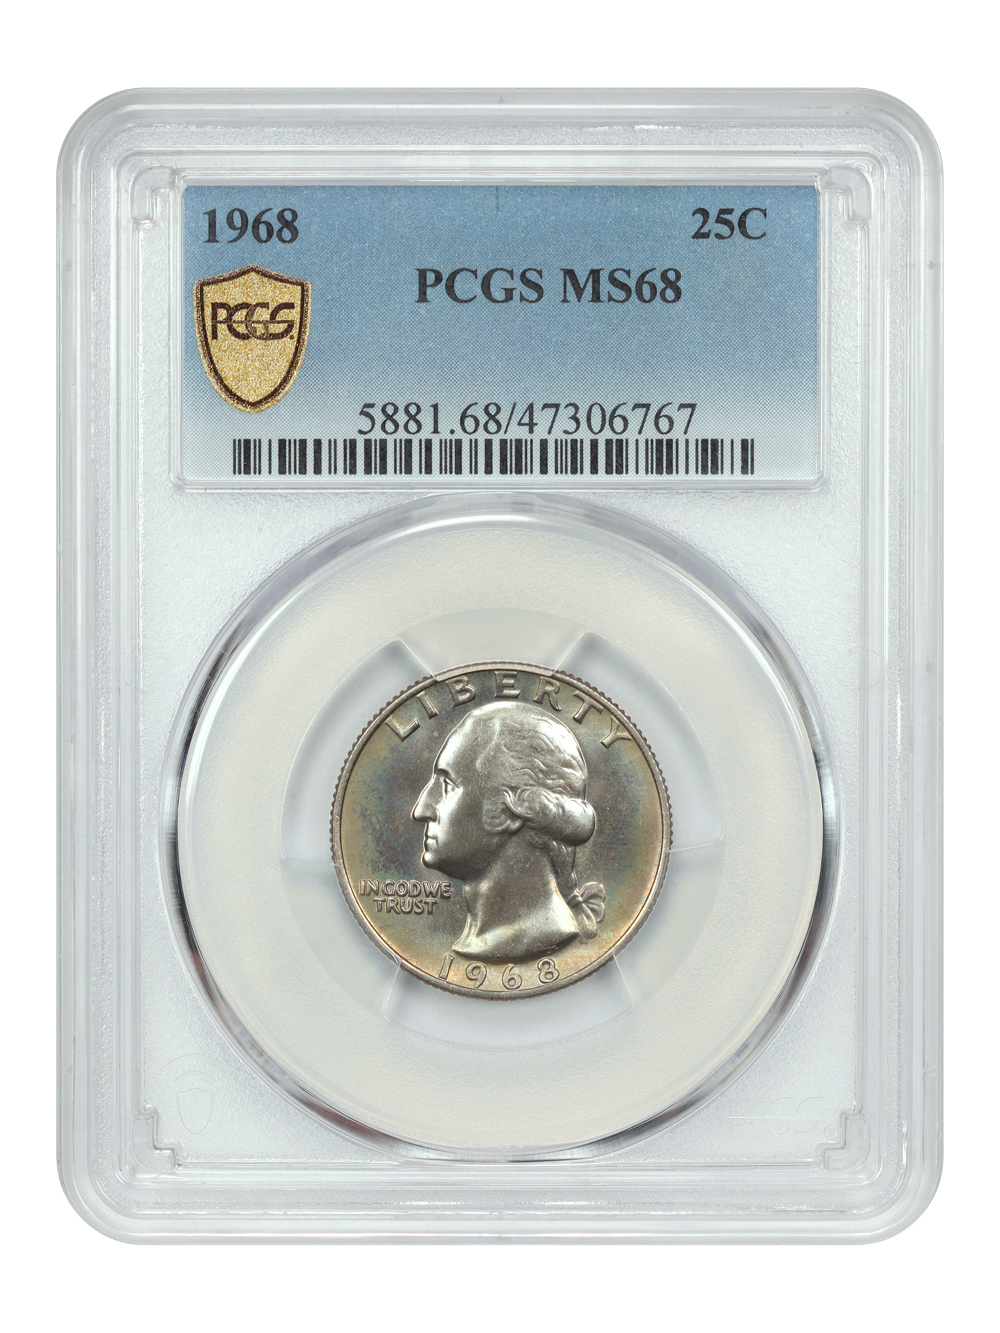 Primary image for 1968 25C PCGS MS68